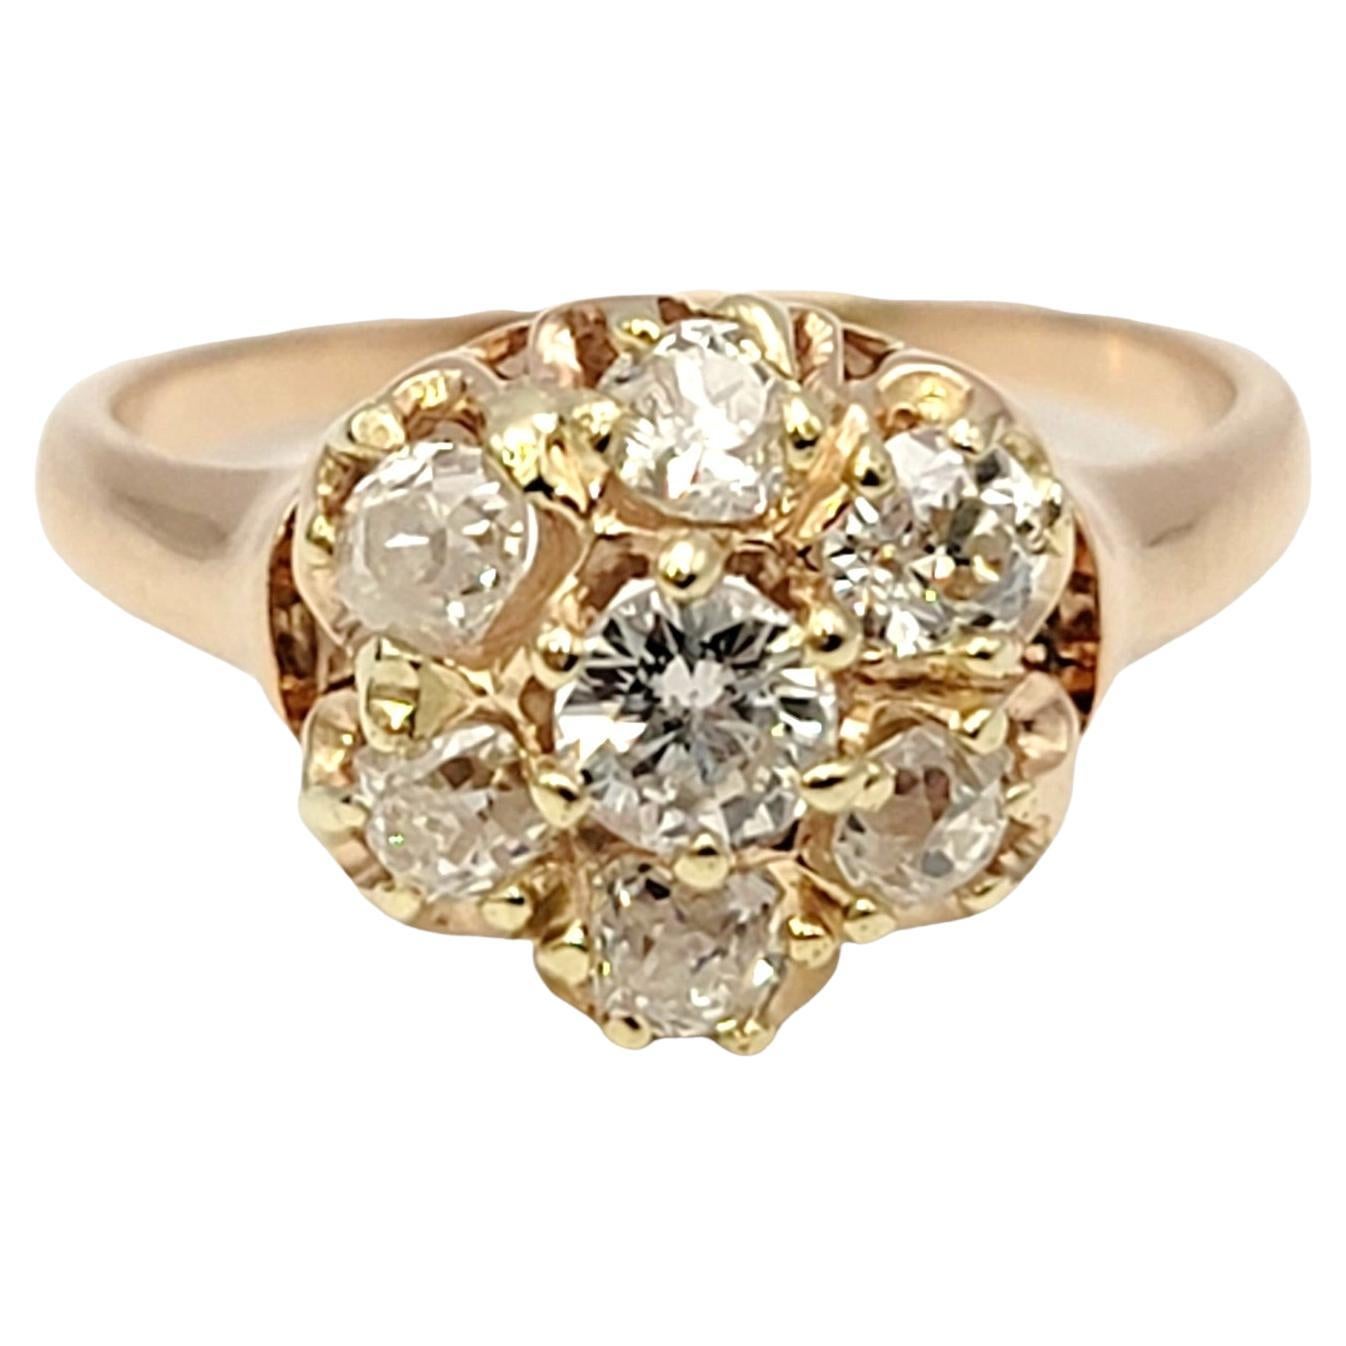 Ring size: 4.5

This romantic vintage ring features 7 incredible Old European cut diamonds set in a rounded cluster at the center of the ring, forming a flower style motif. Offset by a delicate yellow gold shank, the sparkling vintage stones really